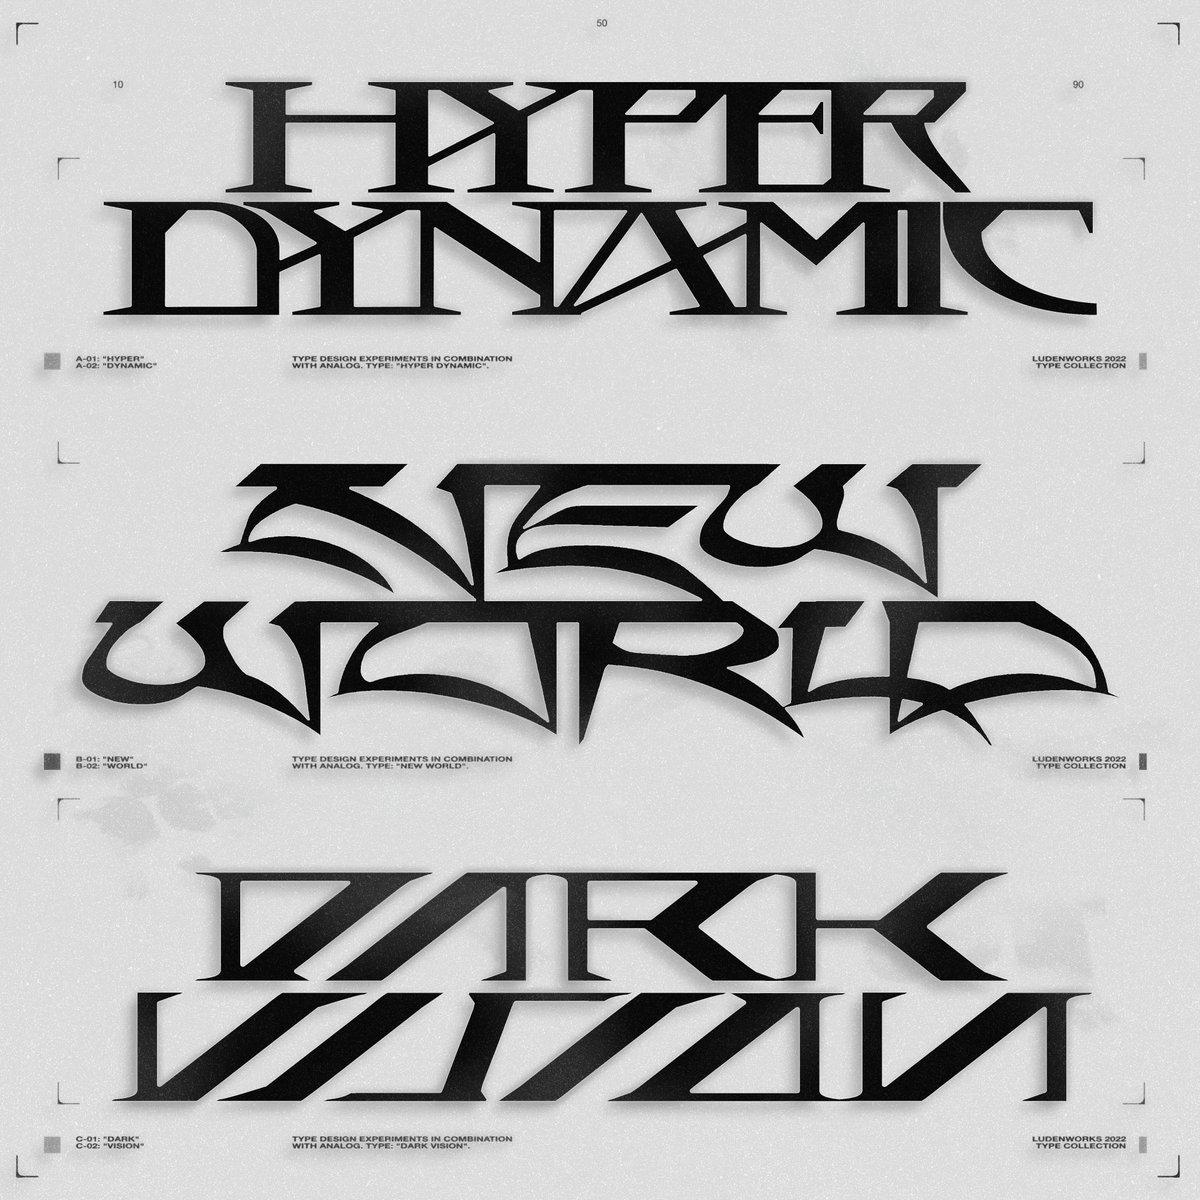 Working on new typefaces. Which one do you like the most?

#logo #logodesign #type #typedesign #typedesigner #typeface #lettering #customtype #typographydesign
#typographyclub #typographydaily #typographyinspire 
#goodtype #thedailytype #typeverything #typespire #alphabet